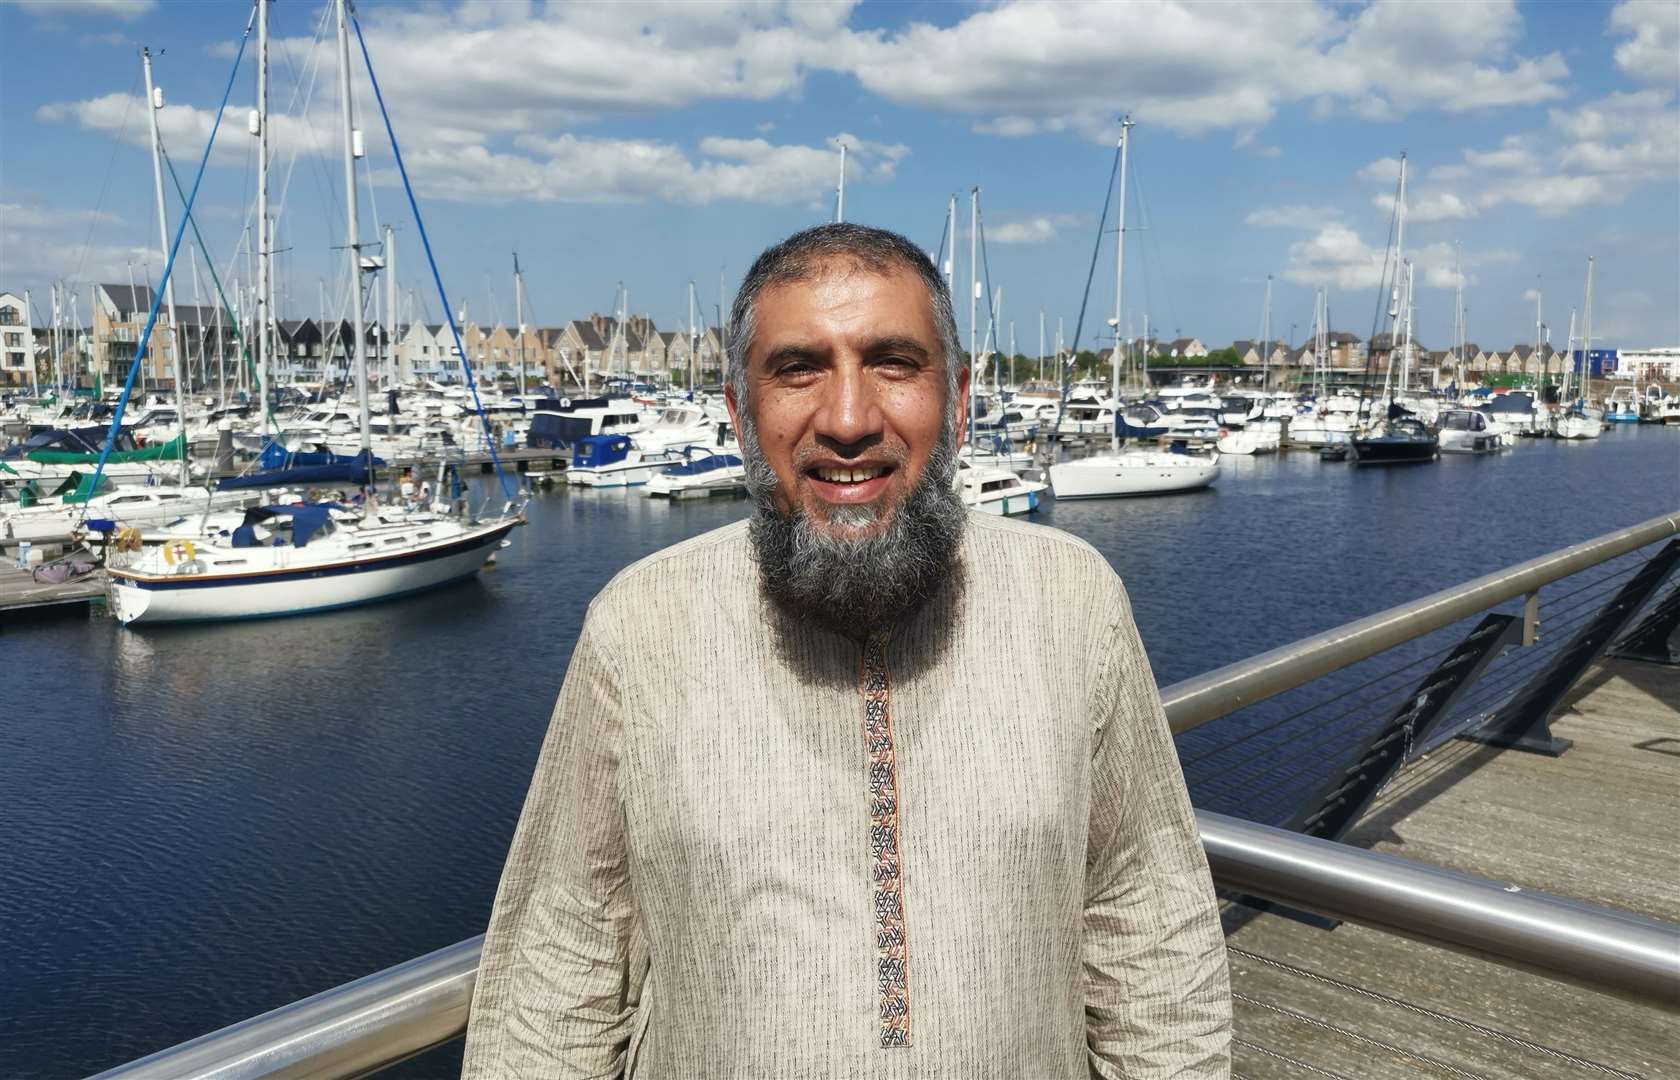 Ajaib Hussain is part of Medway Inter Faith Action